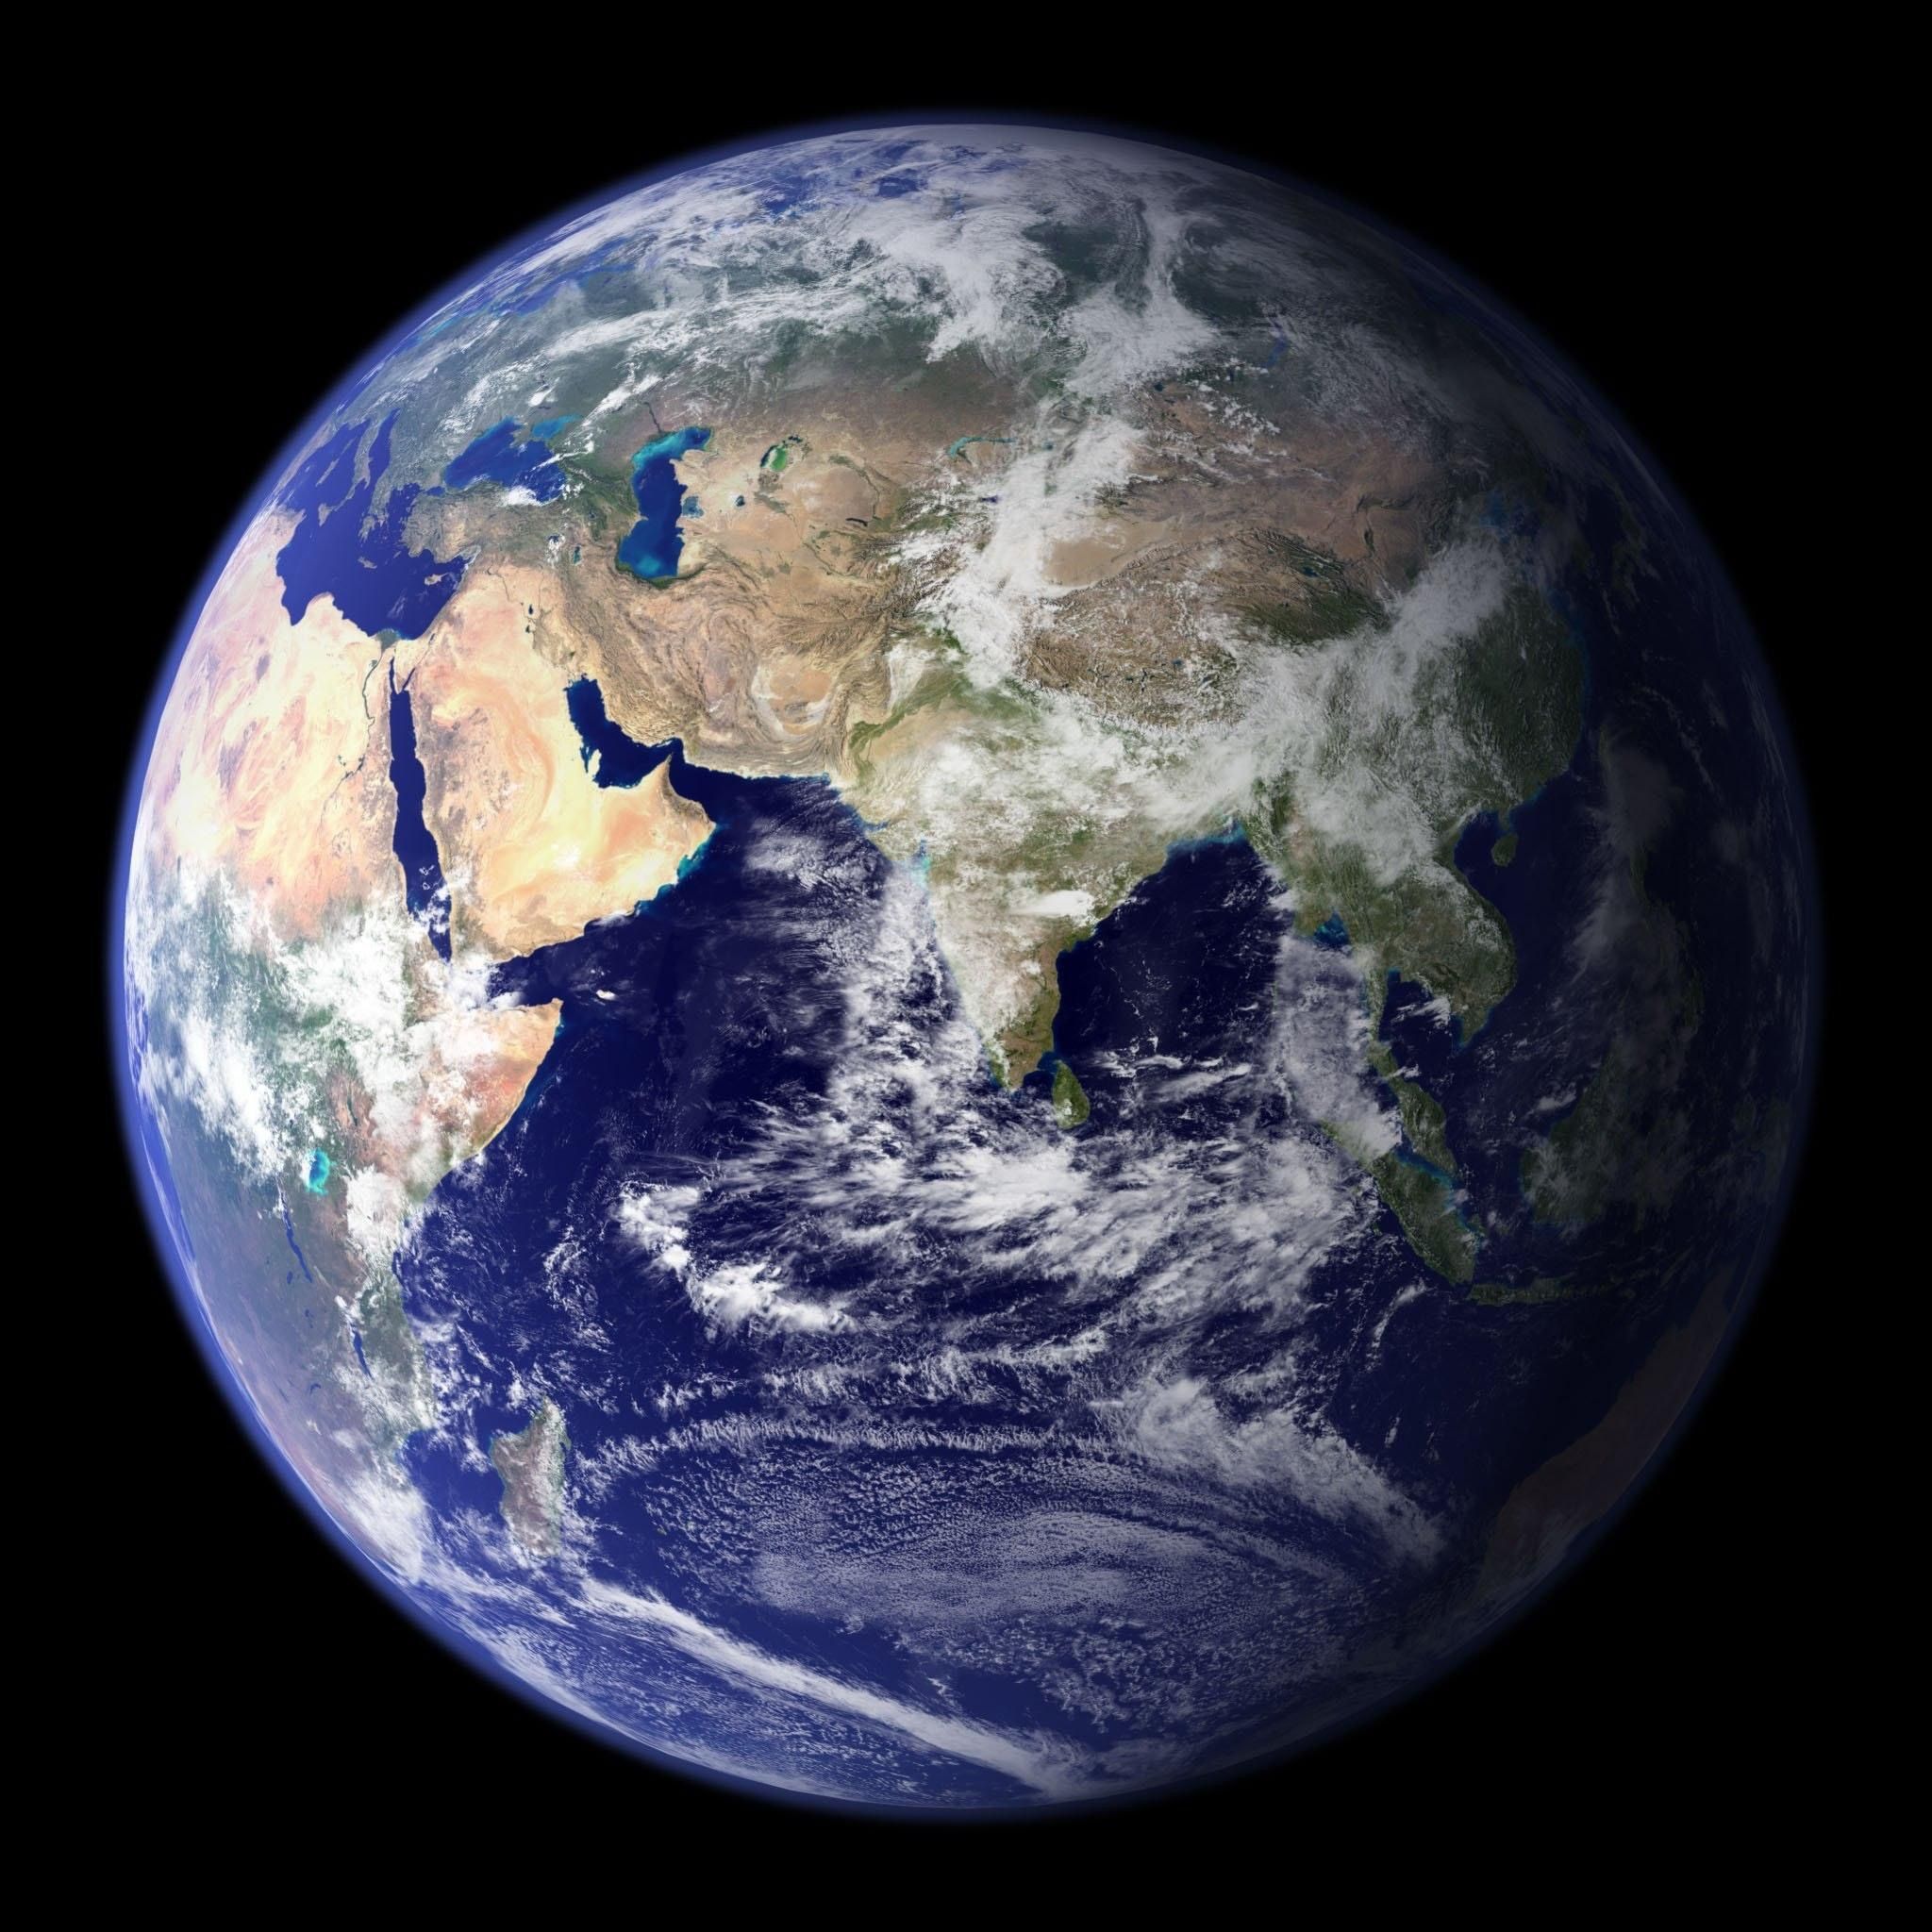 View of the earth from space.